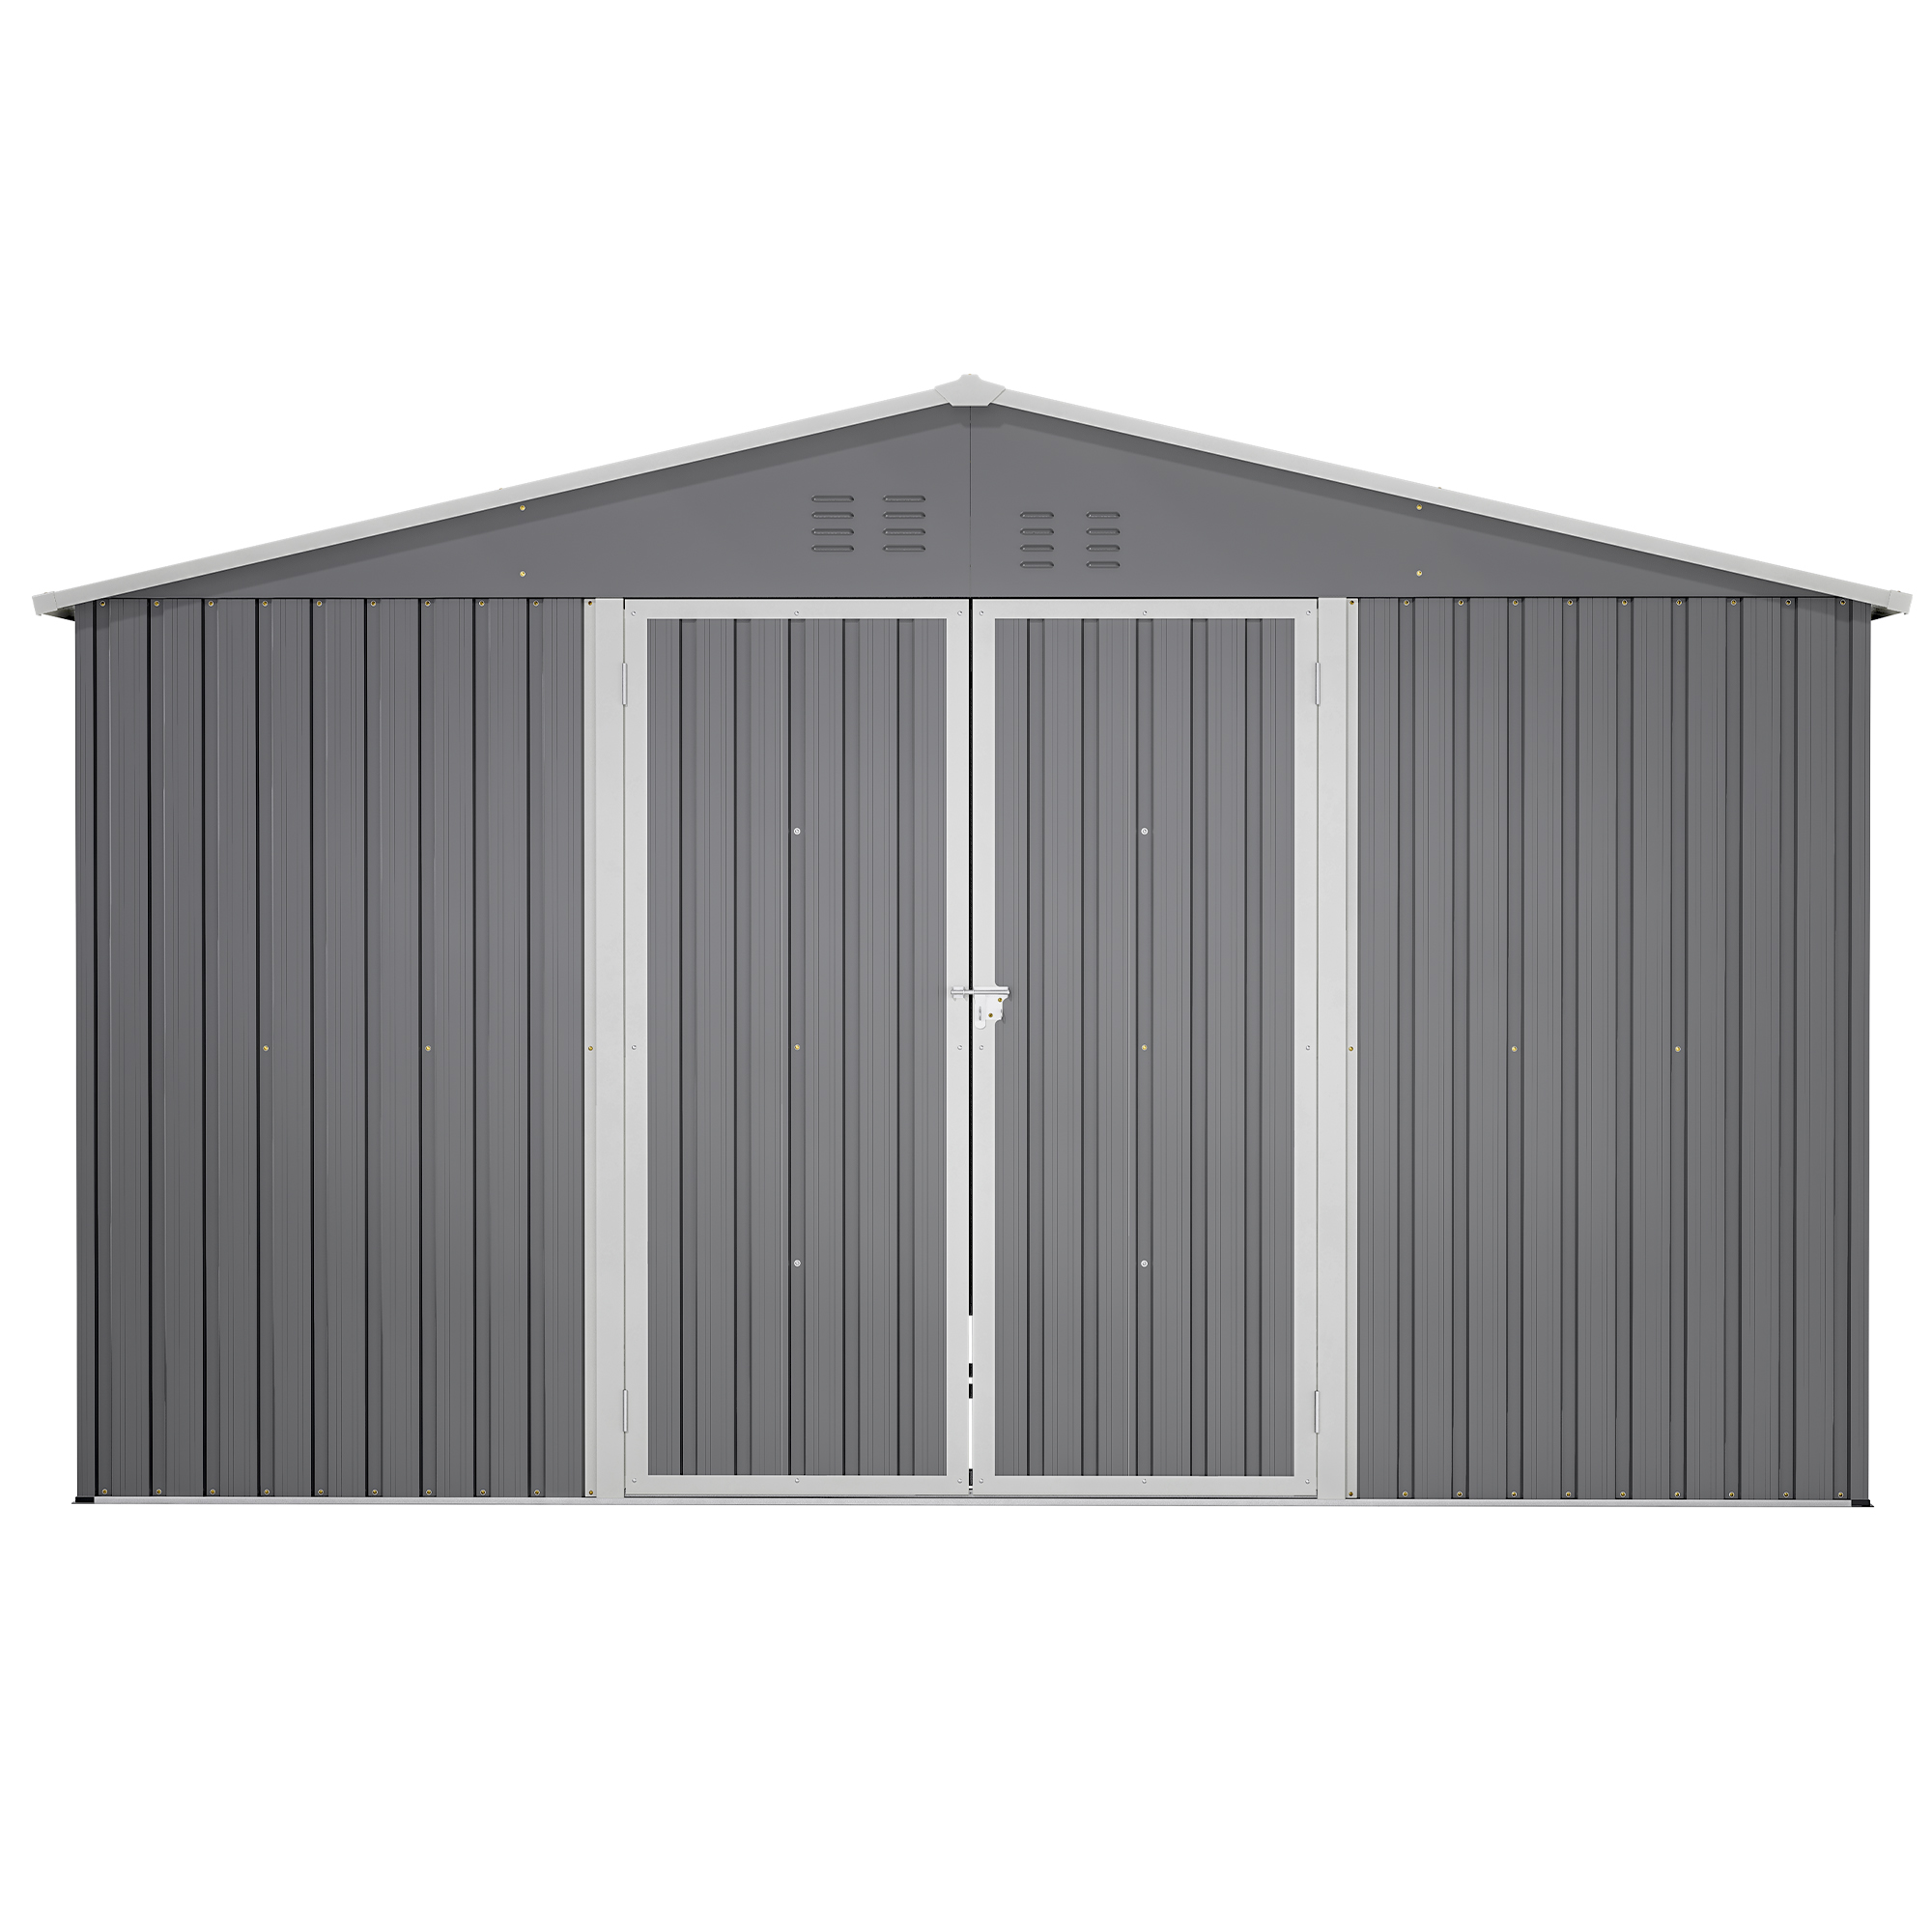 LZBEITEM 11 x 13 ft. Outdoor Storage Shed，Galvanized Steel Garden Shed，Metal ShedsGarden Tool Shed with Double Lockable Doors for Backyard Patio Lawn,Gray - image 4 of 13